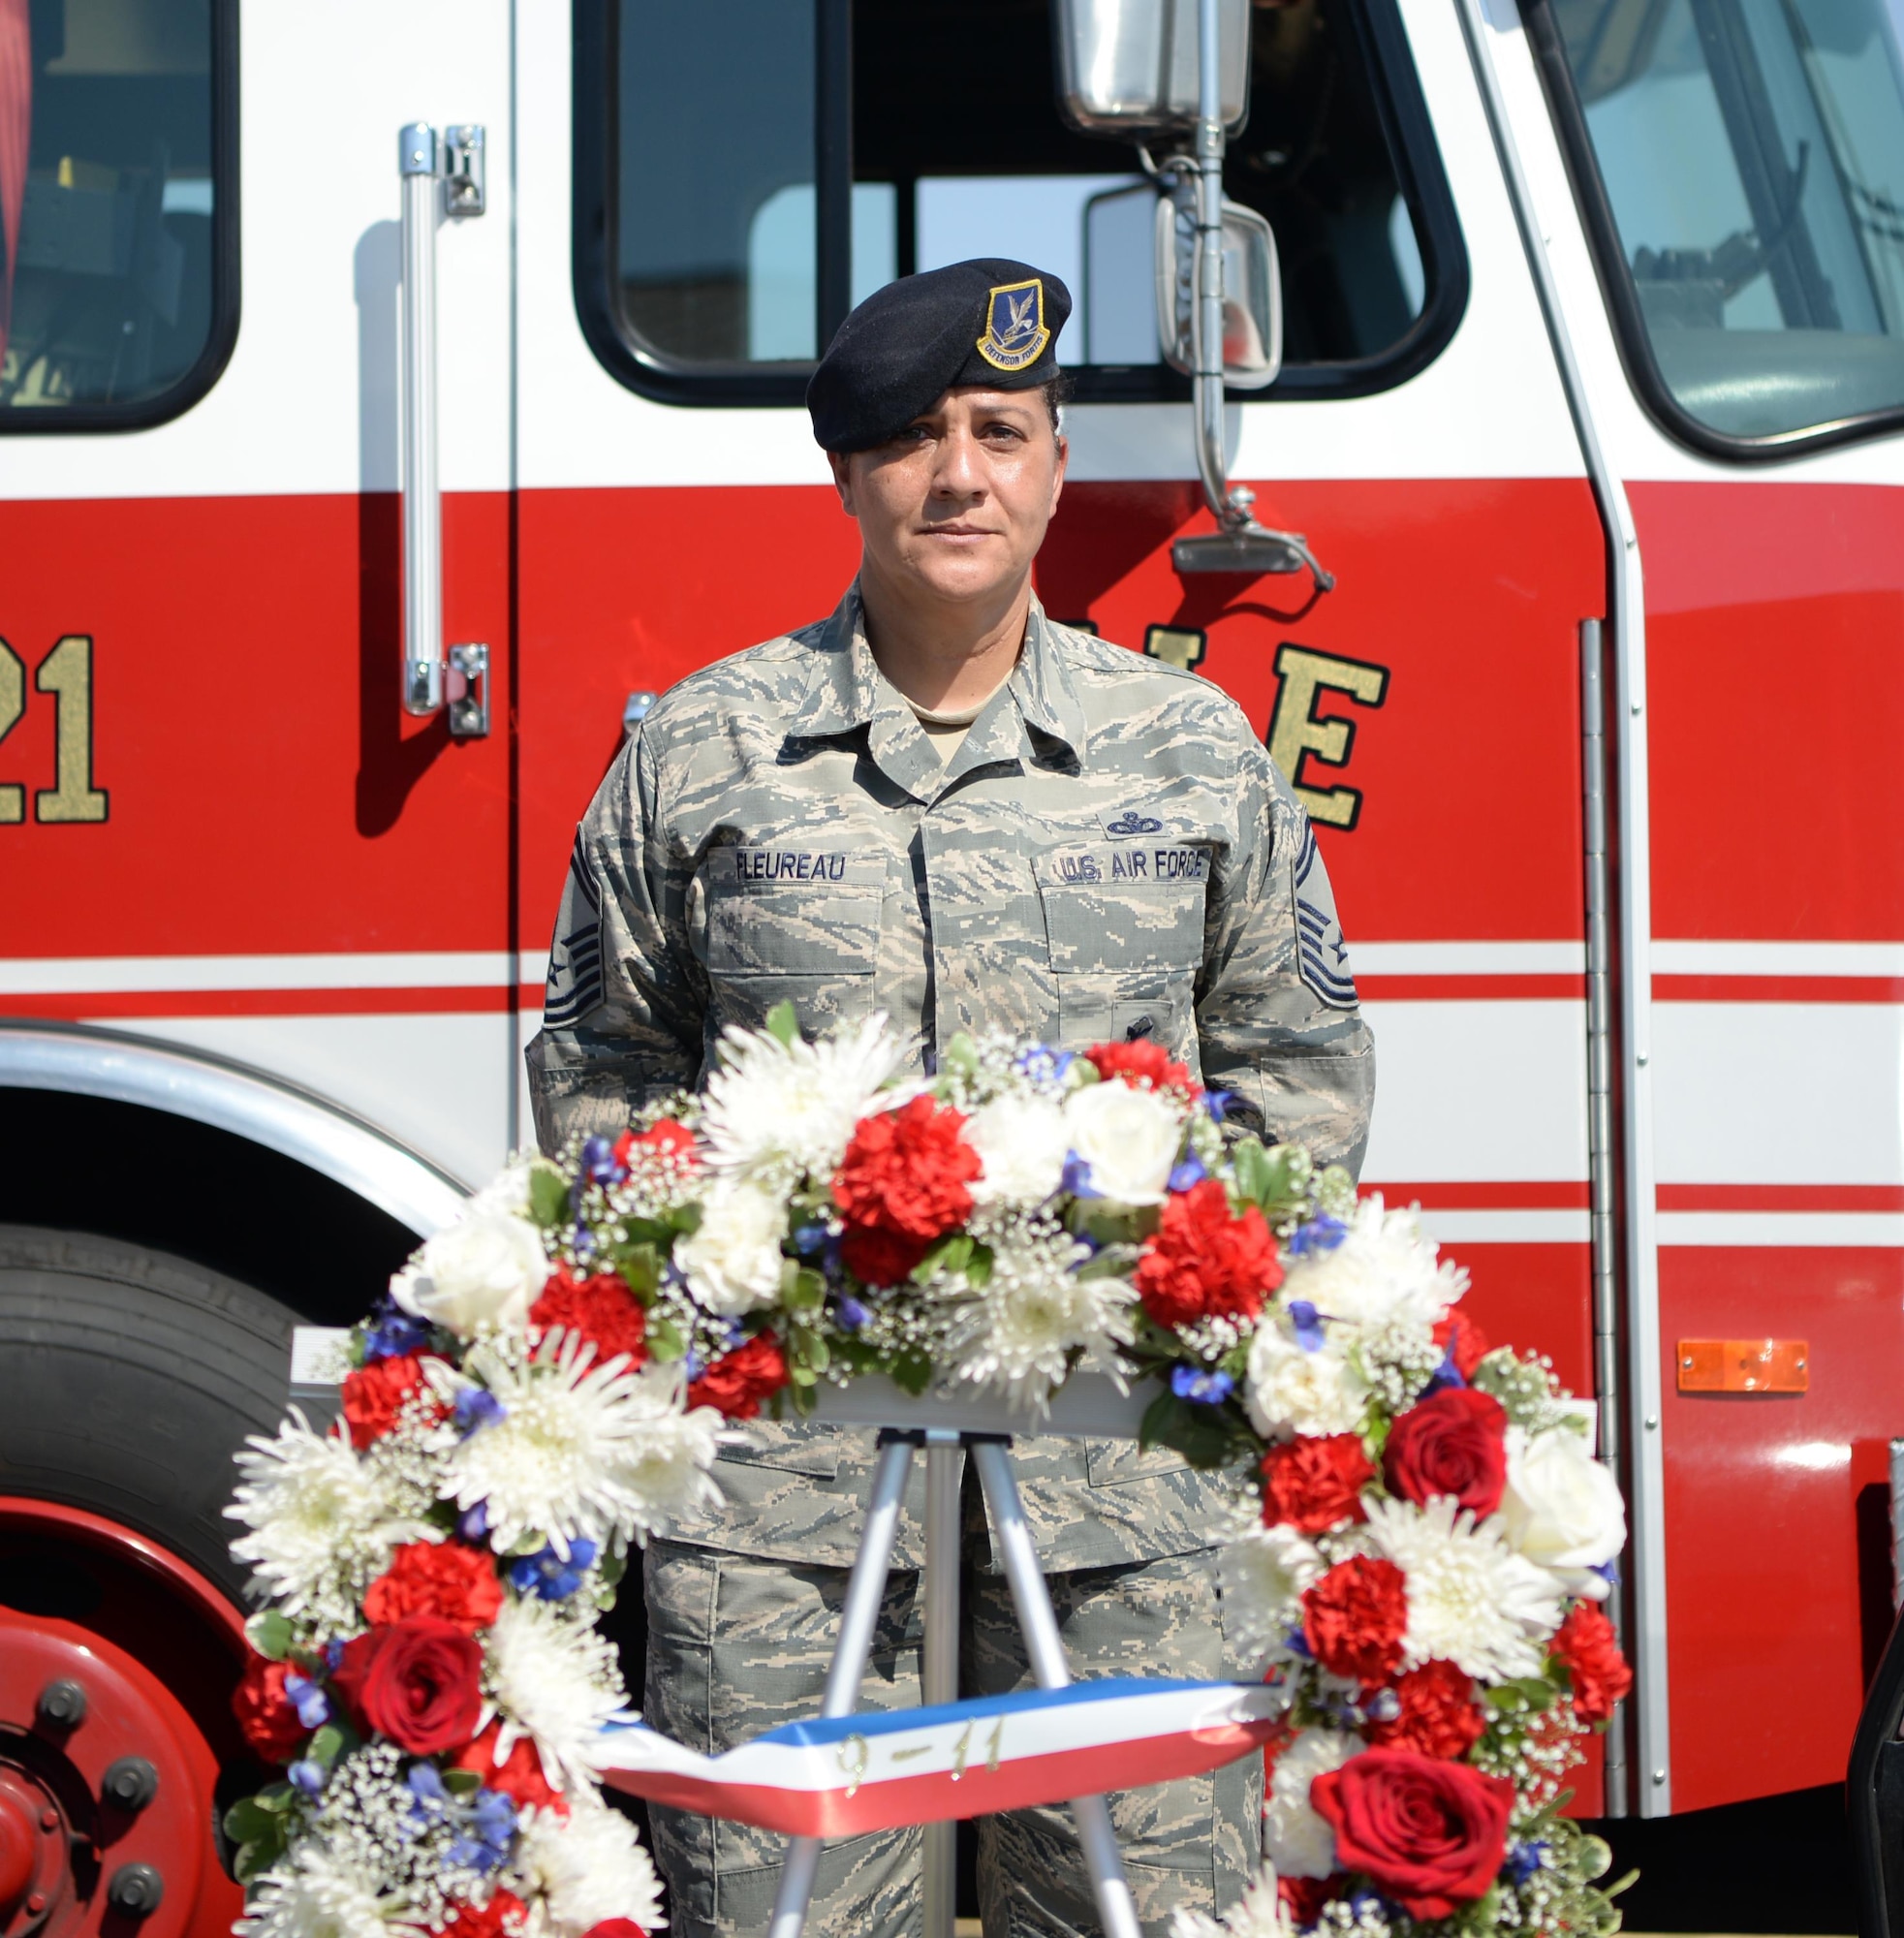 Senior Master Sgt. Bea Fleureau, 9th Security Forces Squadron operations superintendent, presides over a wreath laying Sept. 9, 2016, at Beale Air Force Base, California. The upcoming anniversary of 9/11 marks 15 years since the attacks. (U.S Air Force photo/ Tristan D. Viglianco)